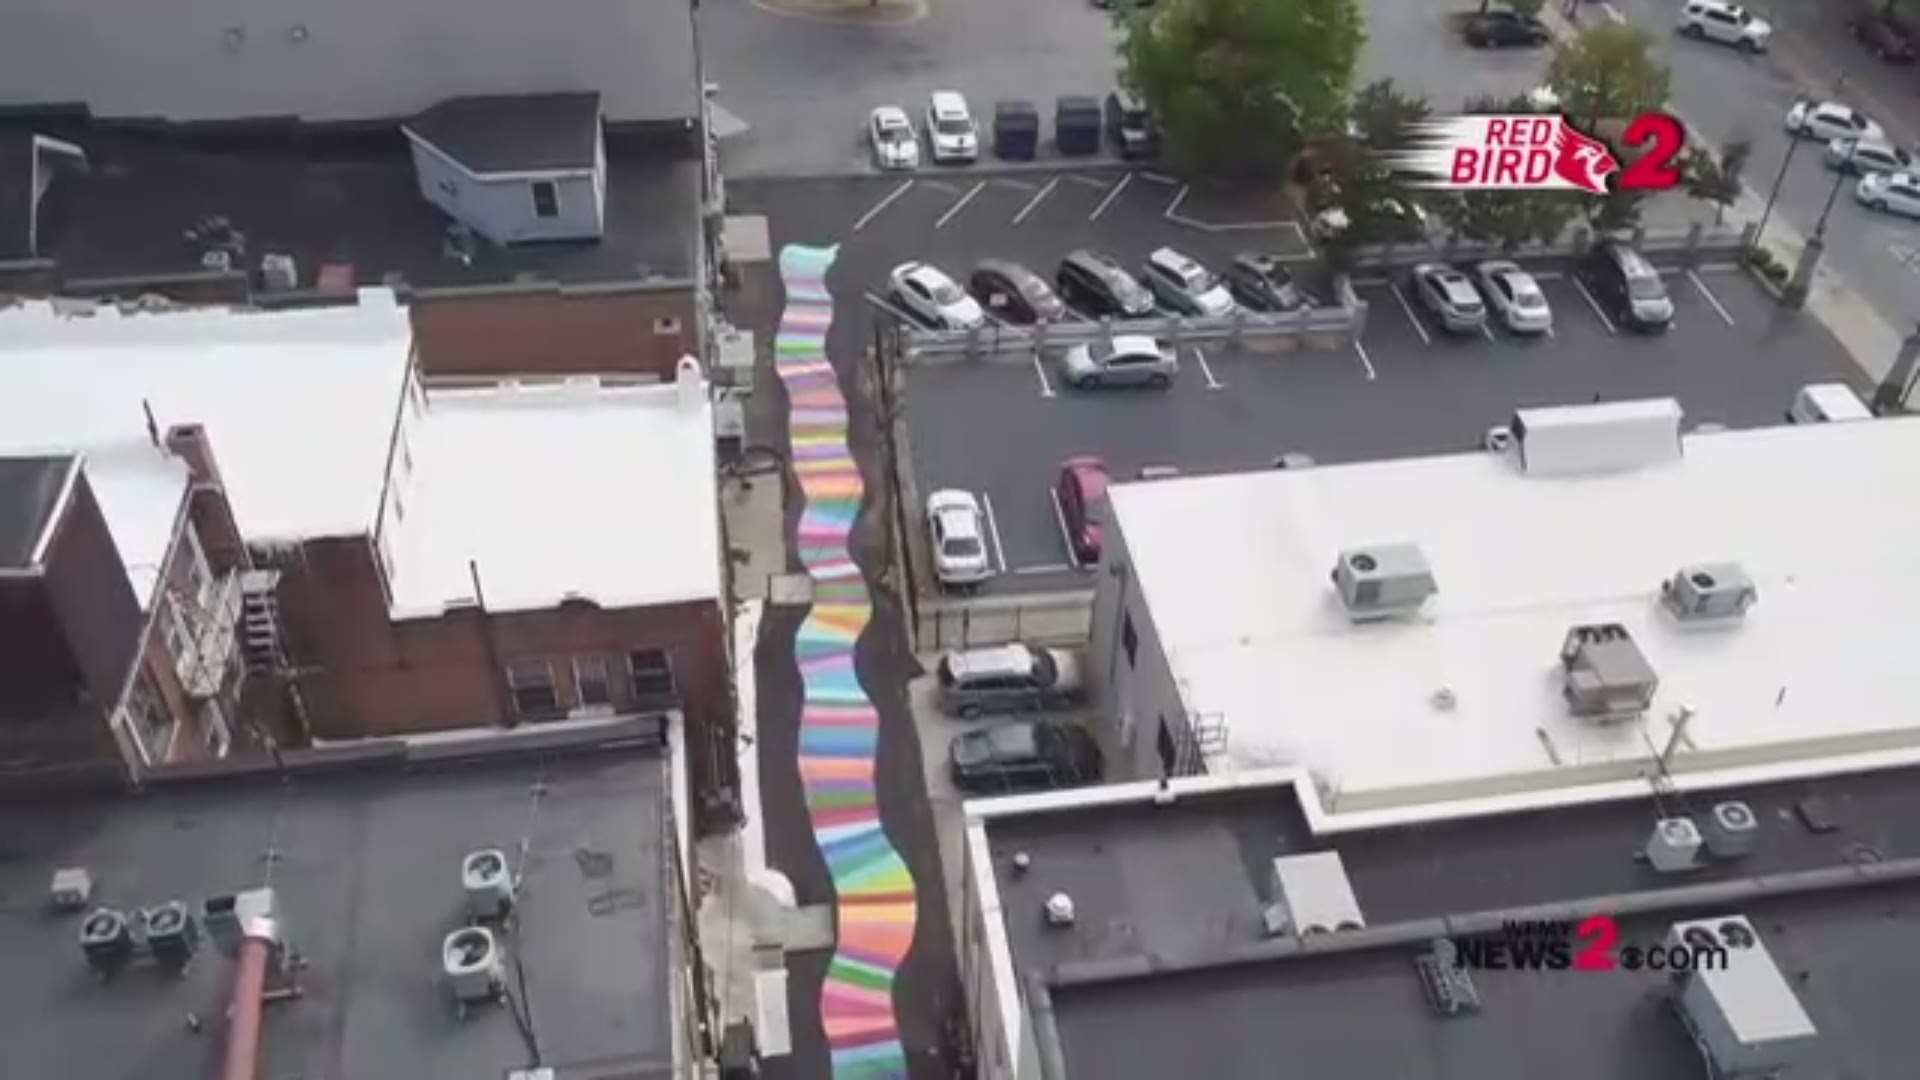 It’s colorful and a very much artsy addition to downtown Greensboro. “Rainbow Alley” was inspired by Downtown Greensboro Inc. and artist Gina Franco.